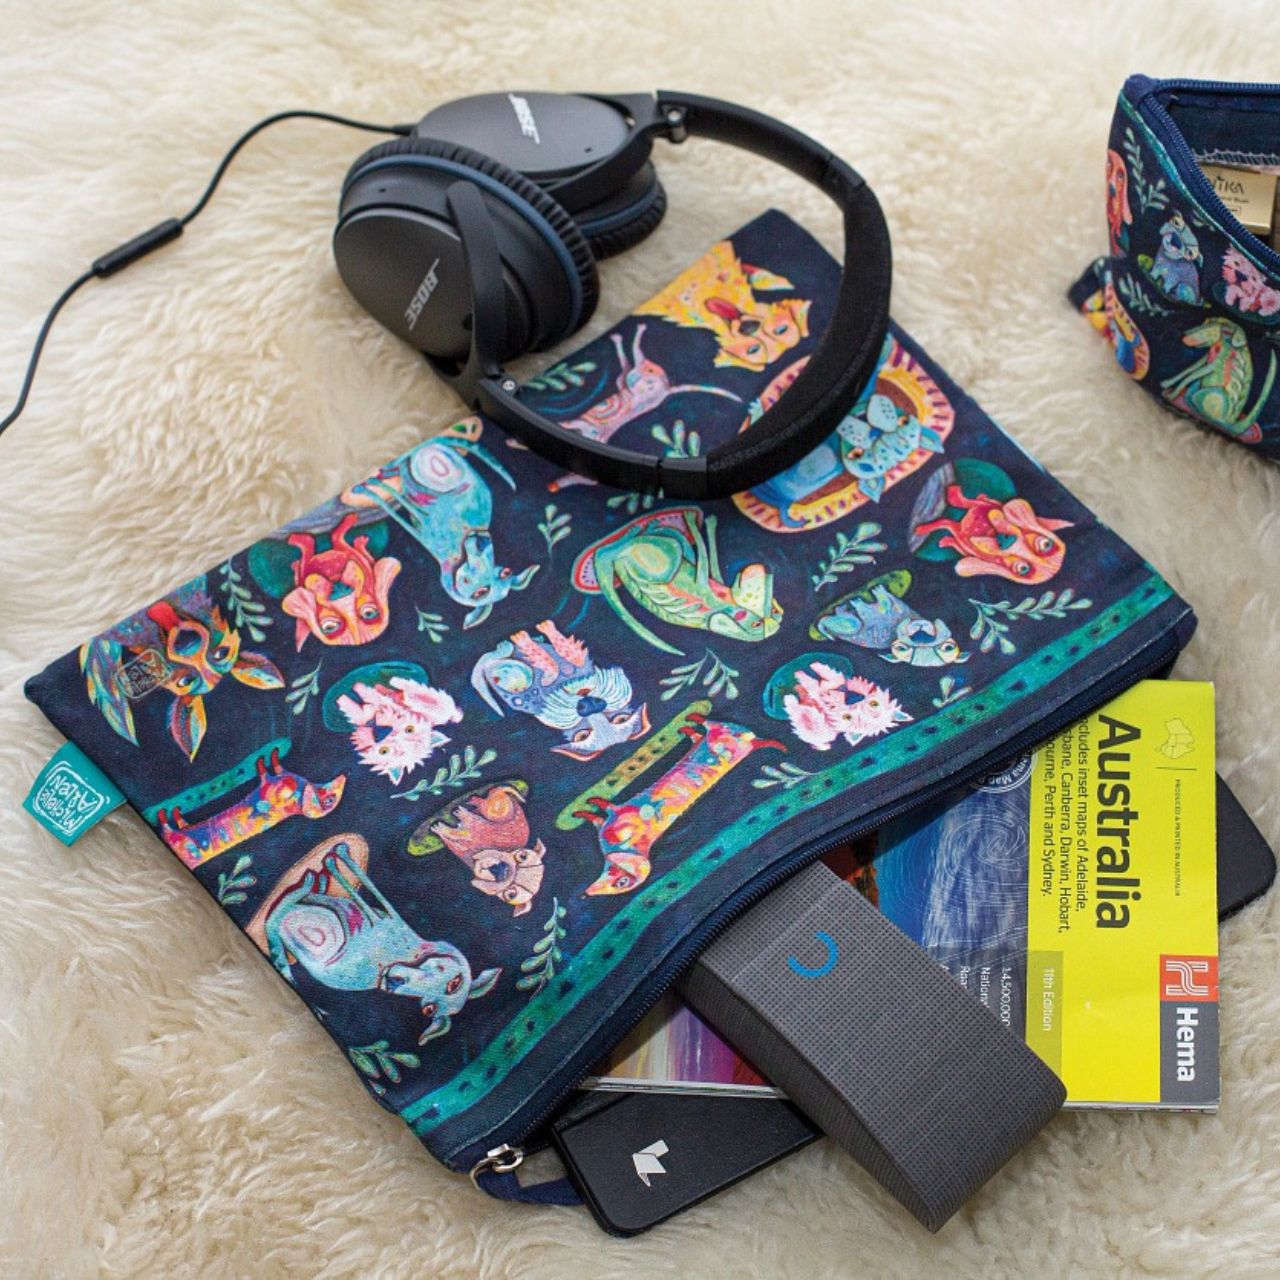 Allen Design Dog Park Zipped Pouch Large  These beautiful zippered 100% Cotton pouches are perfect for pencils/pens, trinkets, charging cords, make up or pretty much anything you can possibly think of. Exclusively designed by Michelle Allen.